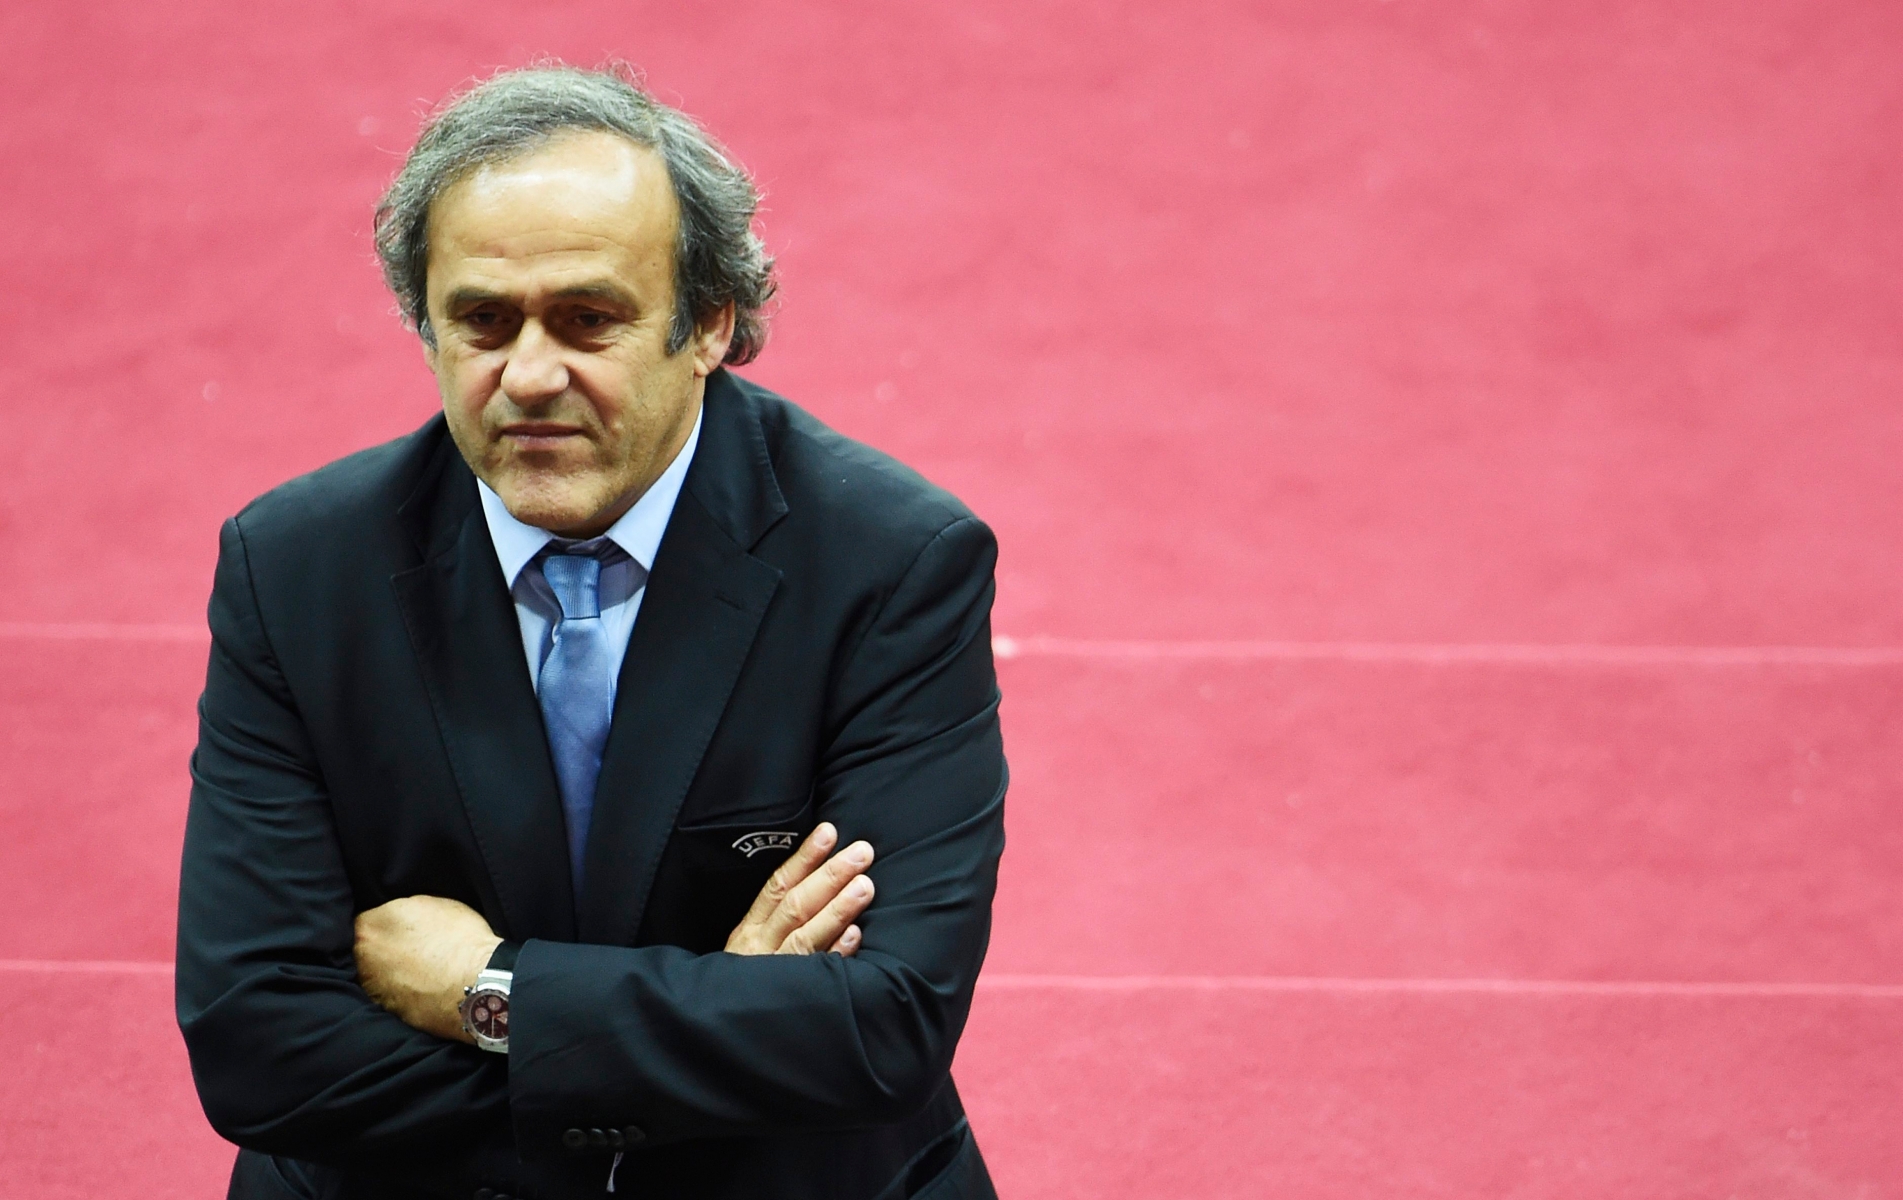 epa05077996 (FILE) Photo dated 27 May 2015 shows UEFA President Michel Platini during half time of the UEFA Europa League final between FC Dnipro Dnipropetrovsk and Sevilla FC at the National Stadium in Warsaw, Poland. FIFA President Joseph Blatter and UEFA President Michel Platini were banned from football for eight years by the ethics committee of football's world governing body on 21 December 2015.  EPA/Radek Pietruszka FILE POLAND SOCCER UEFA PLATINI